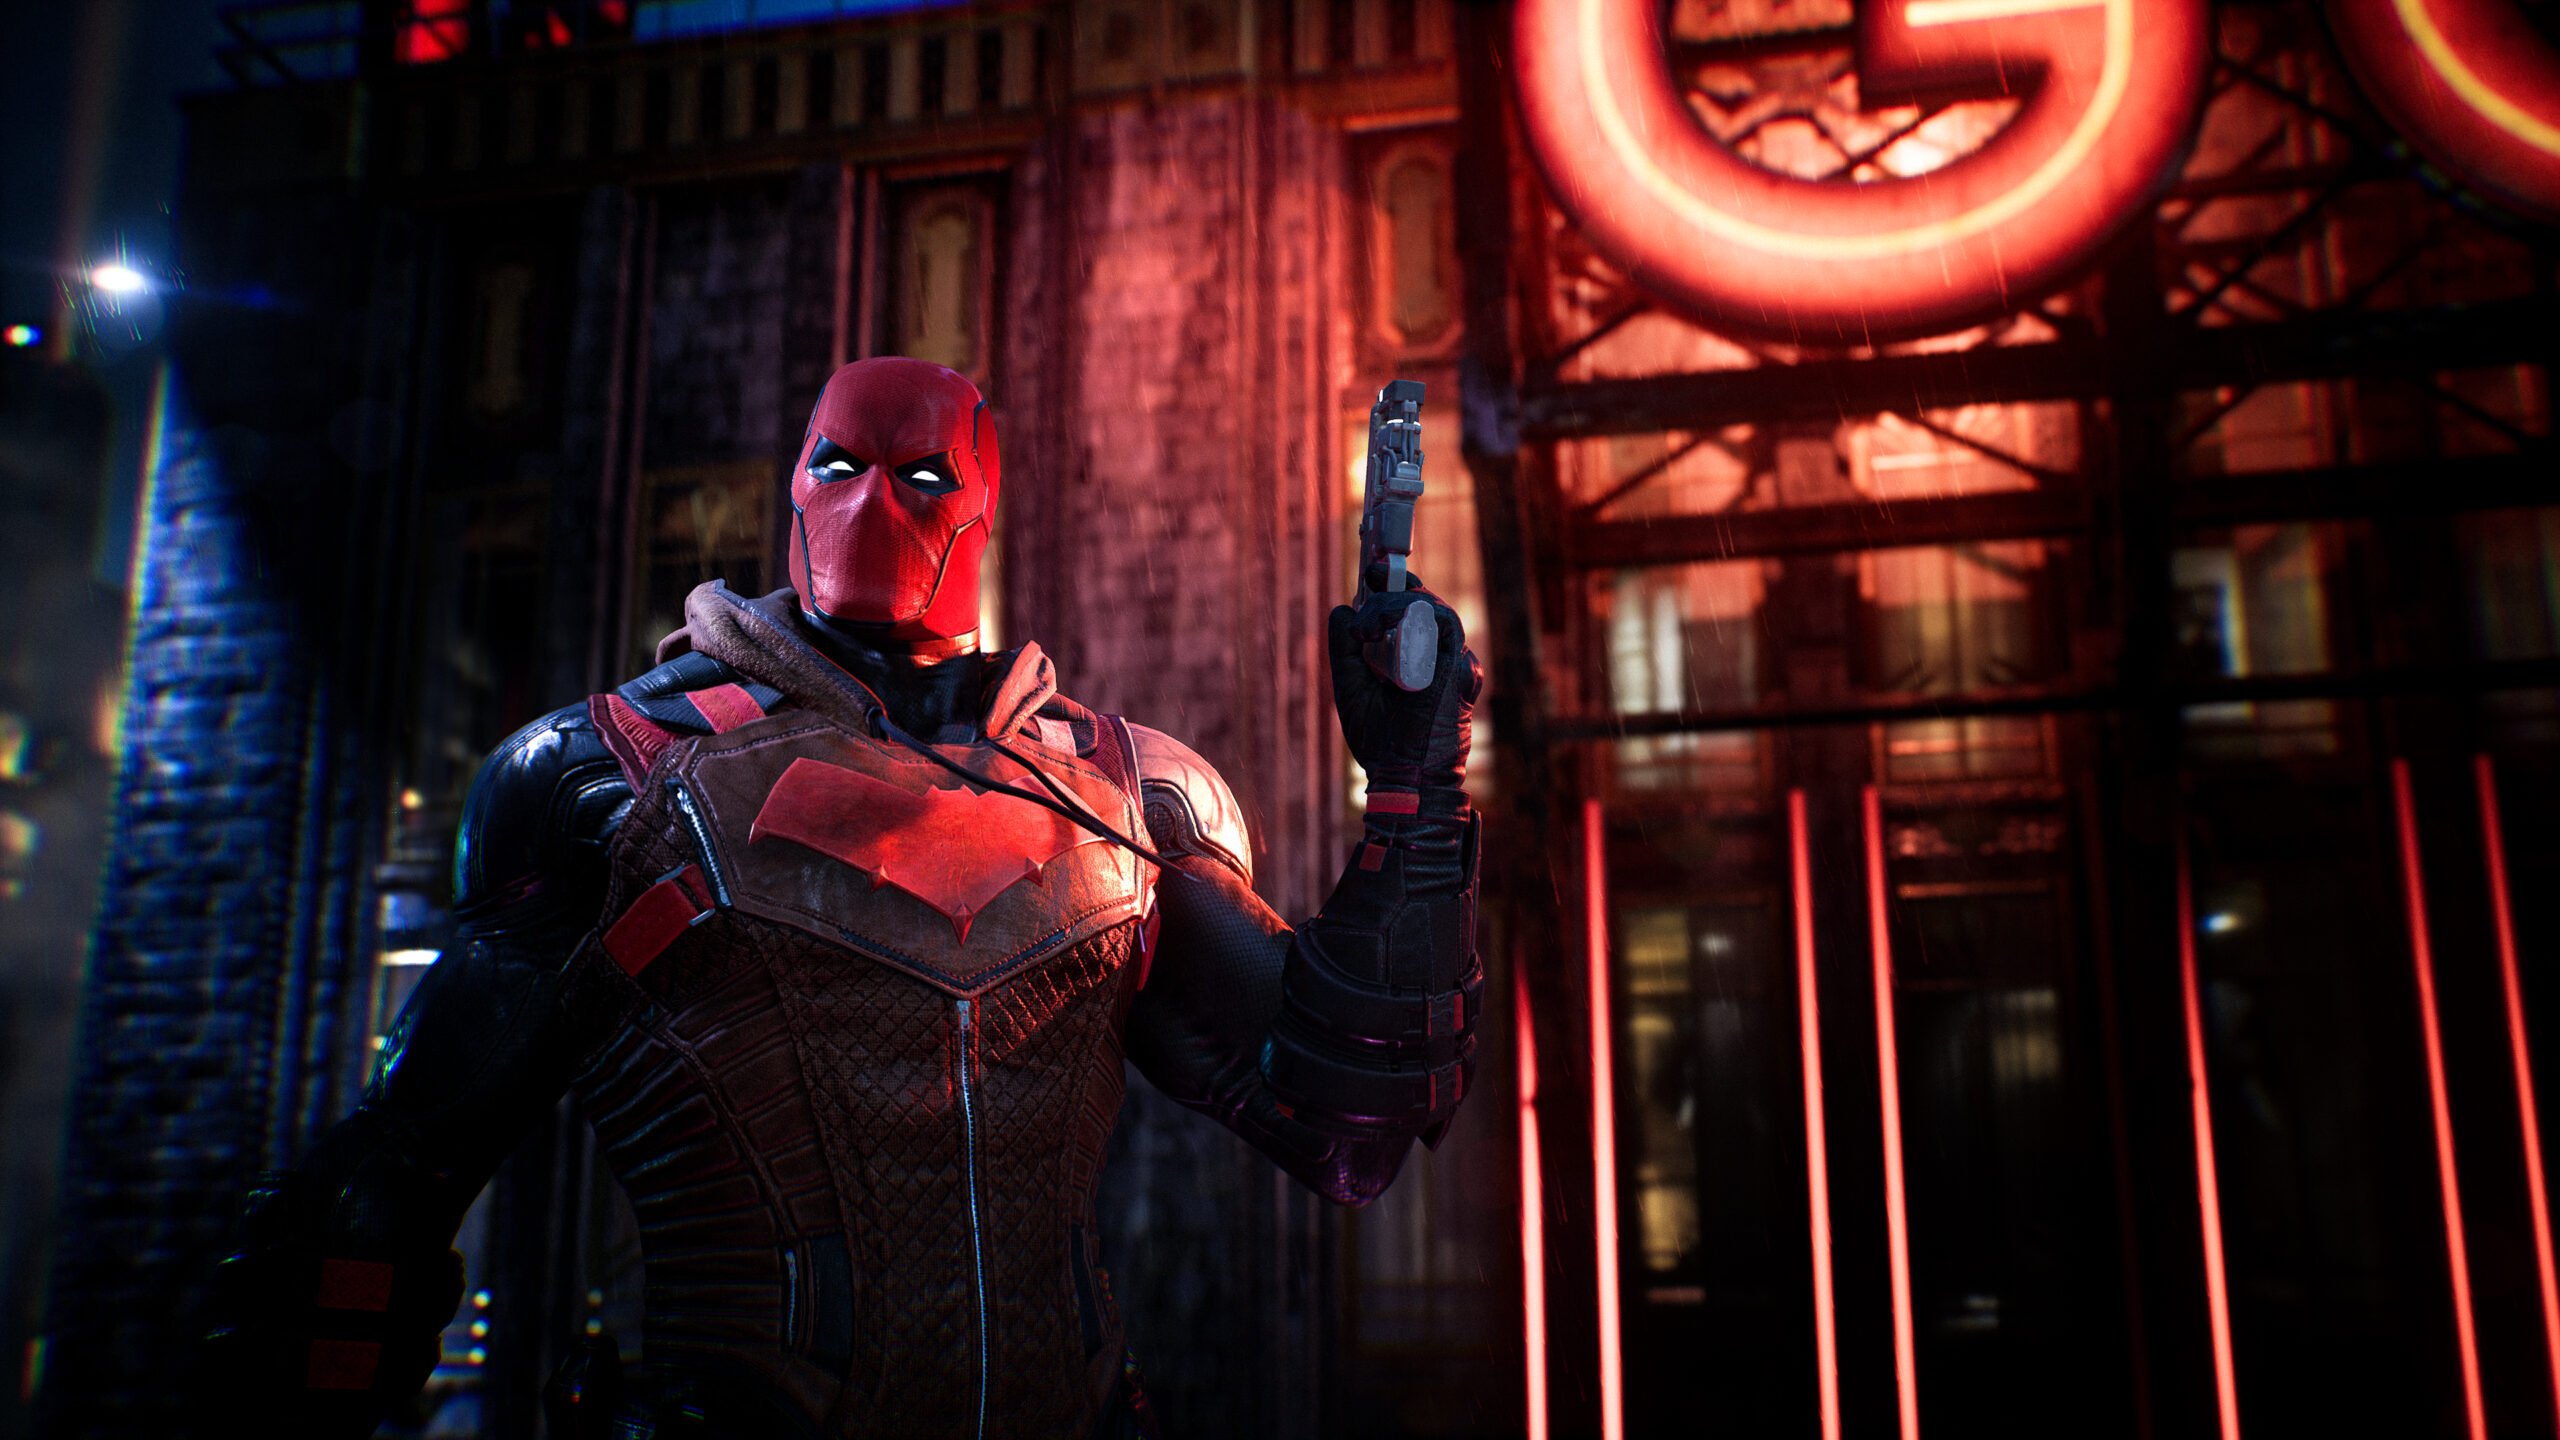 Gotham Knights Release Date, Trailer, Gameplay, and More